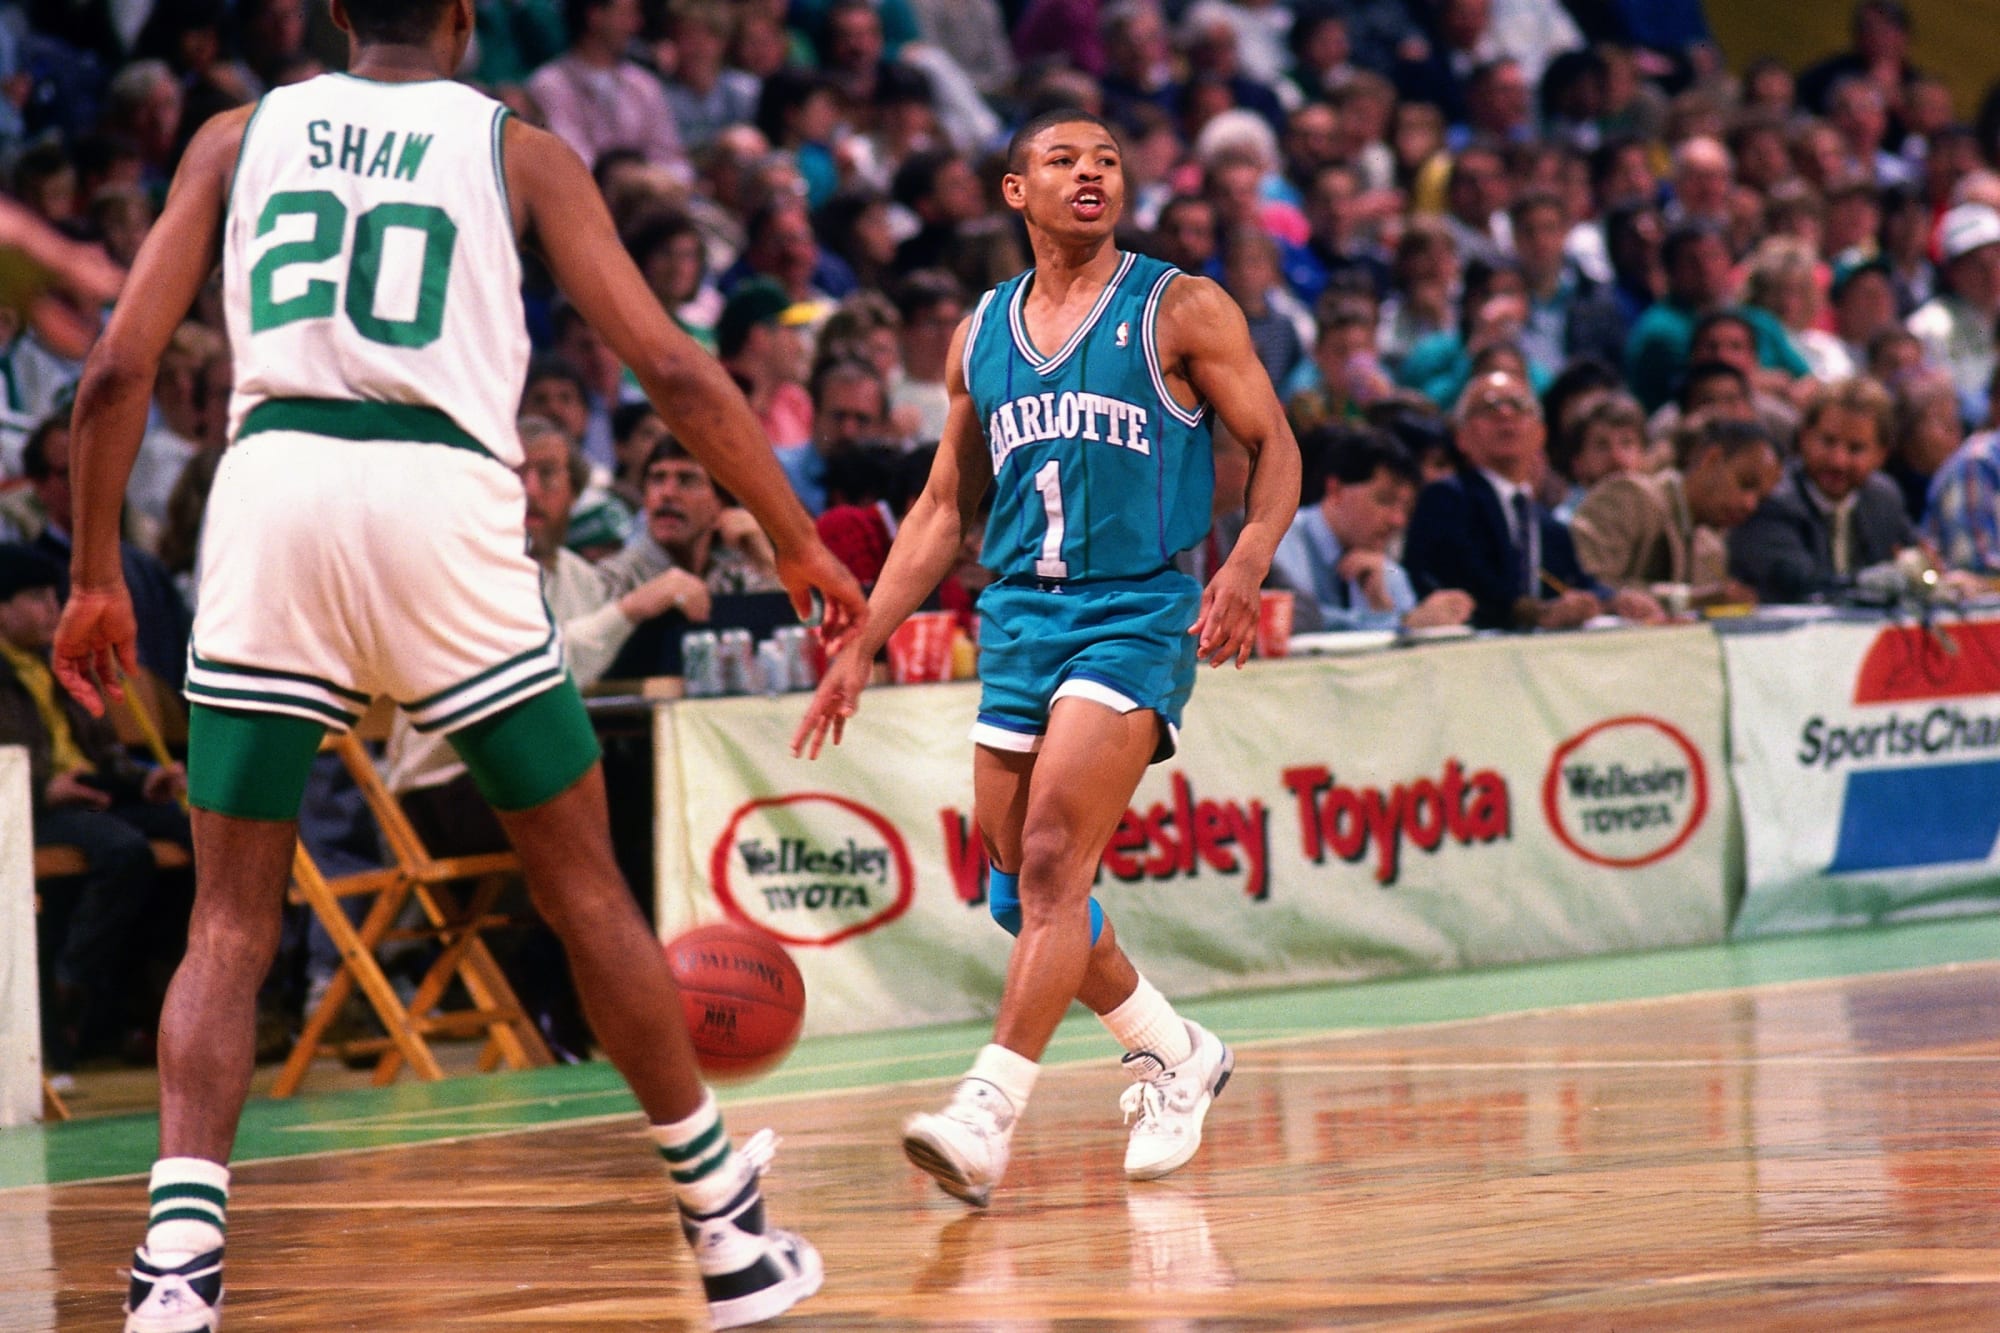 Tyrone Muggsy Bogues on playing in the NBA and Space Jam 